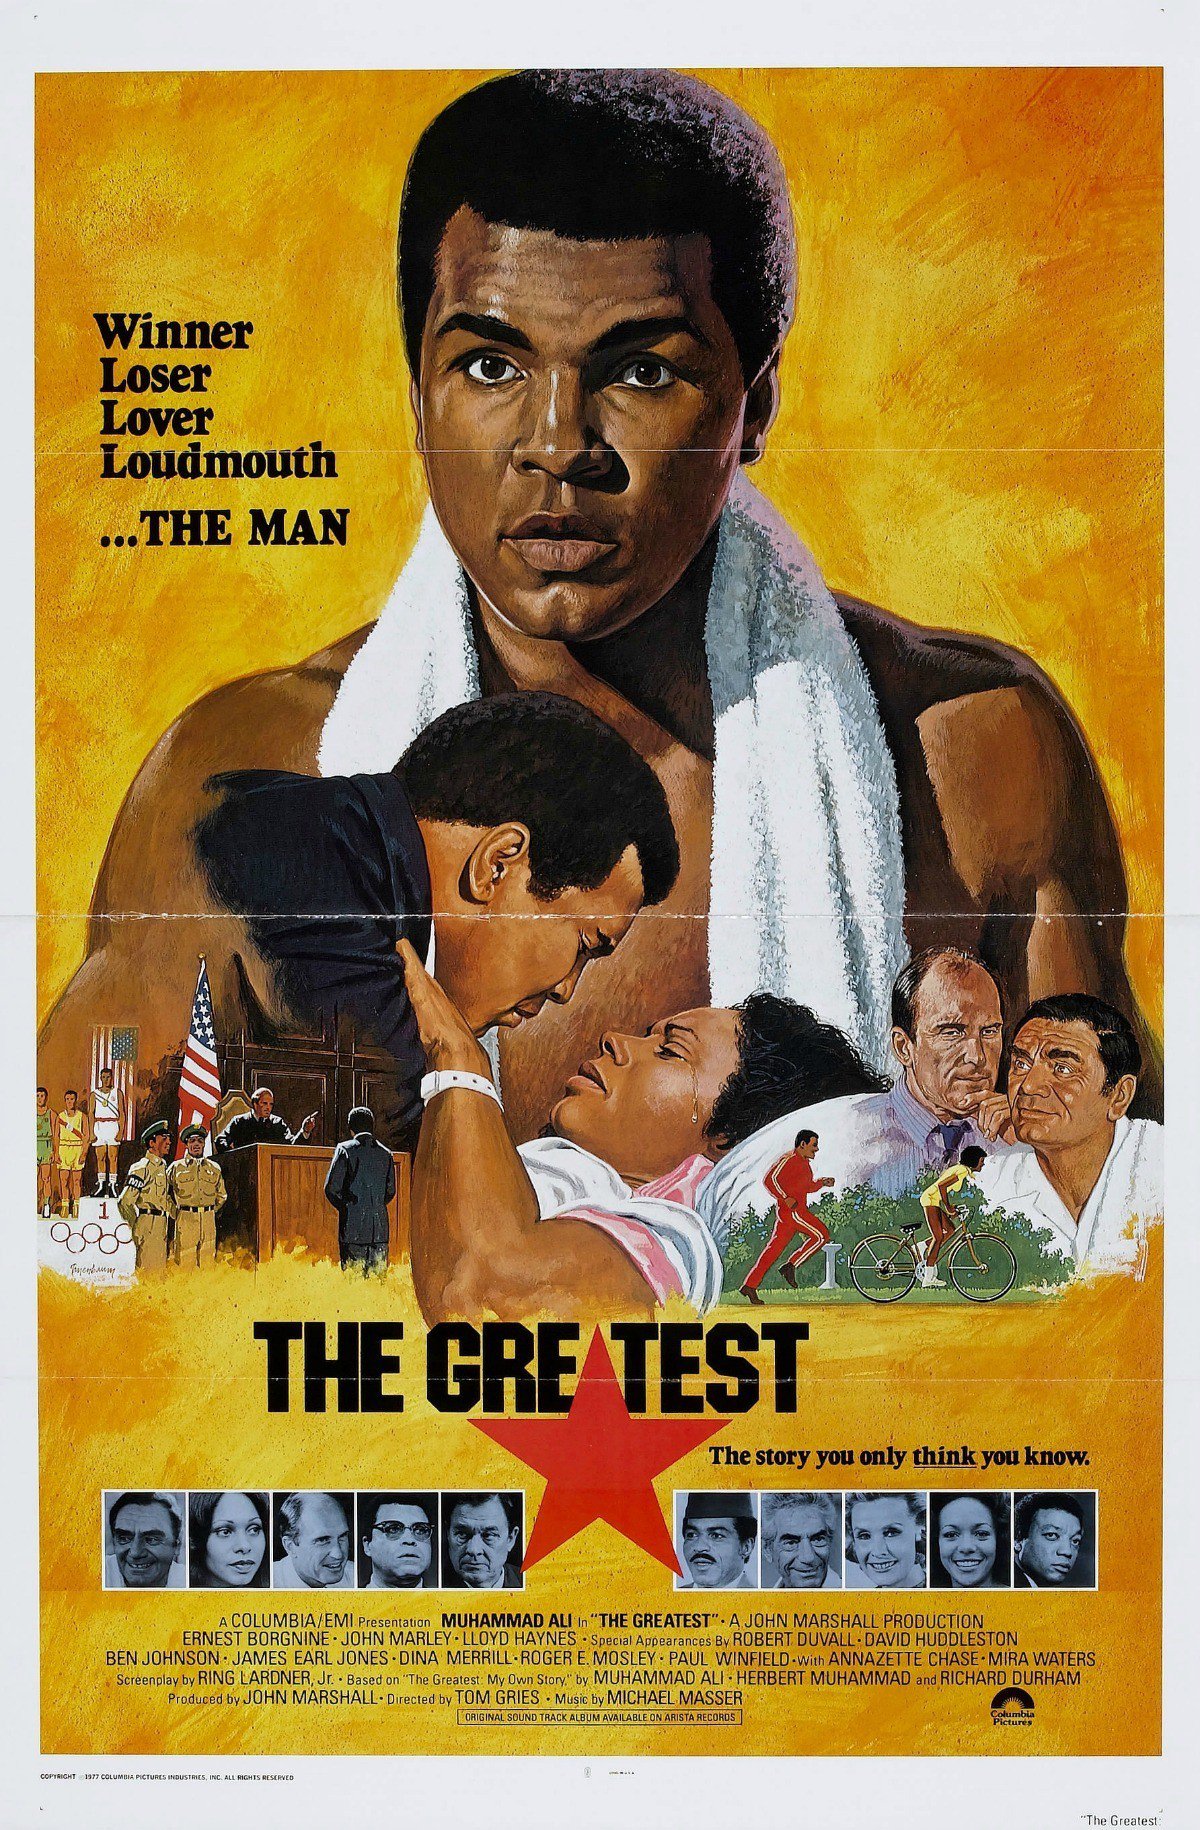 Poster for the movie "The Greatest"